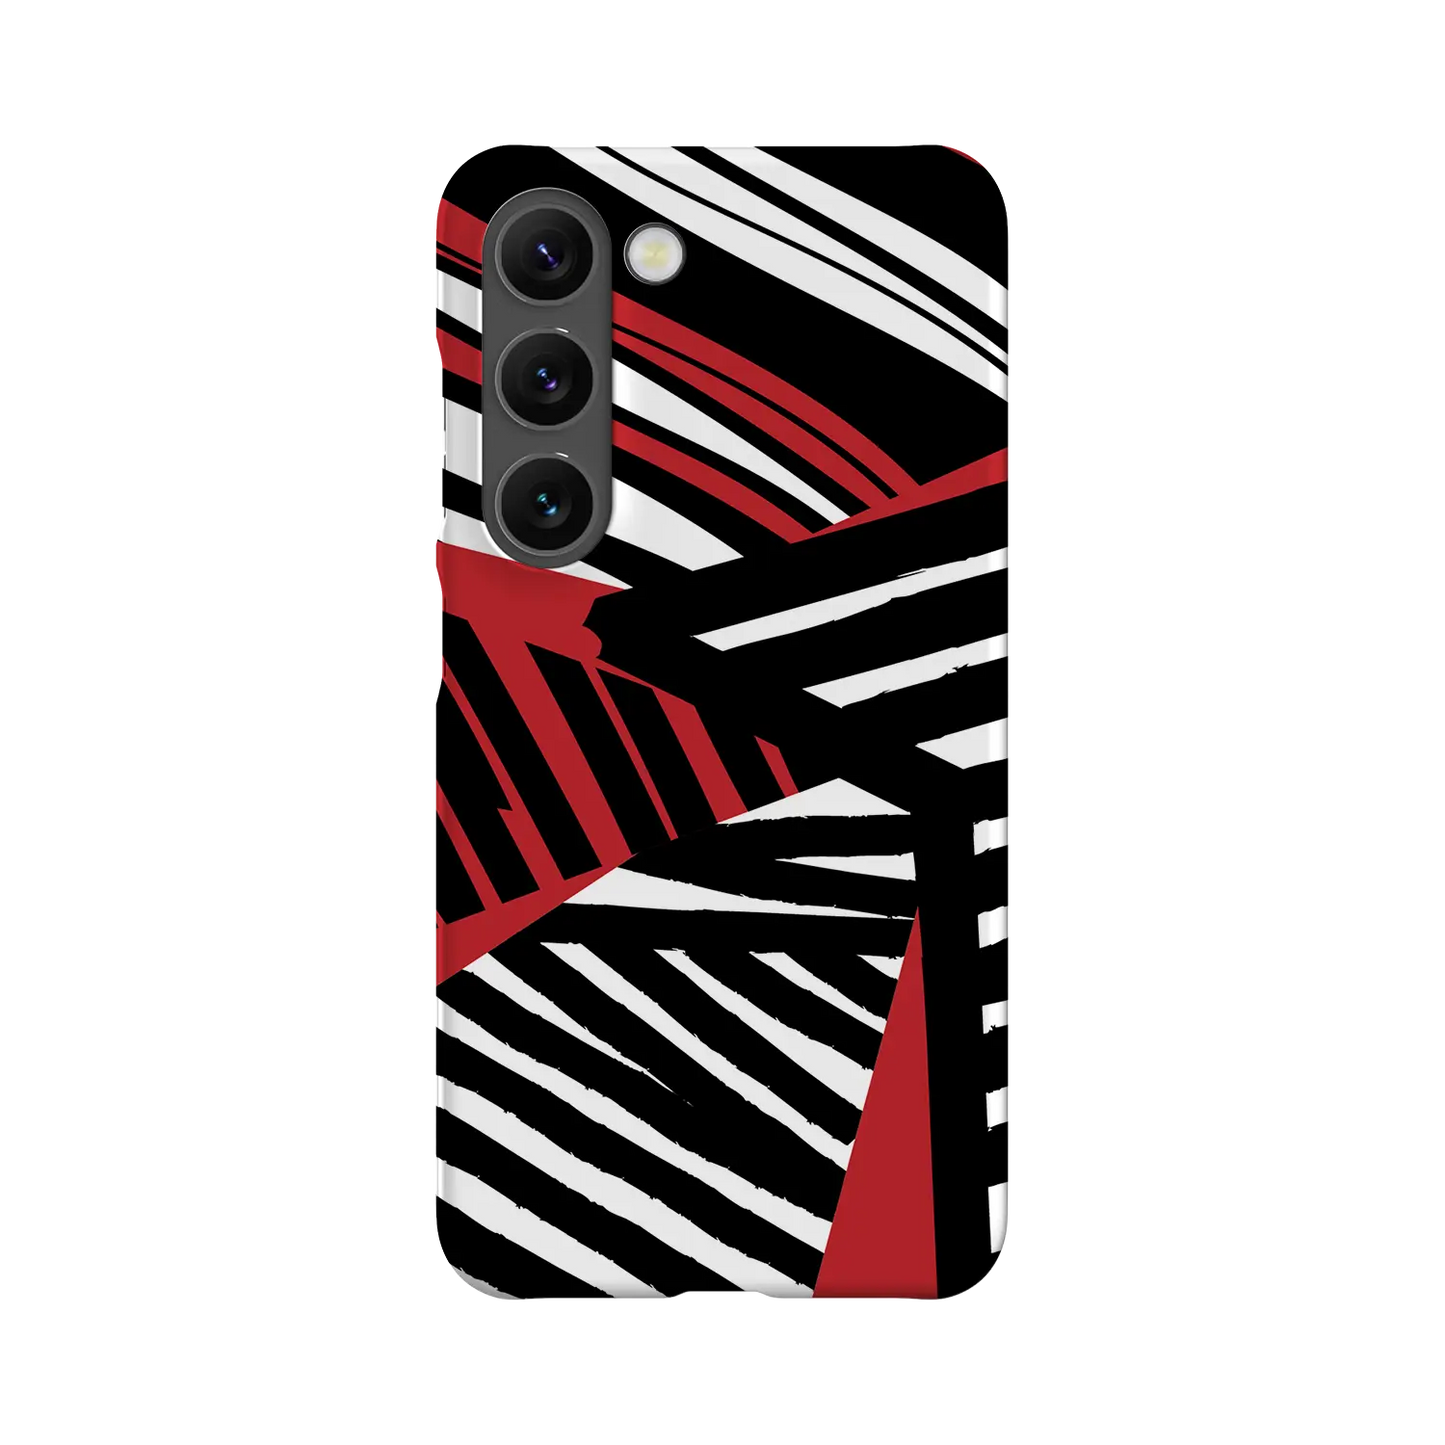 Stripes - Personalised Galaxy S Case